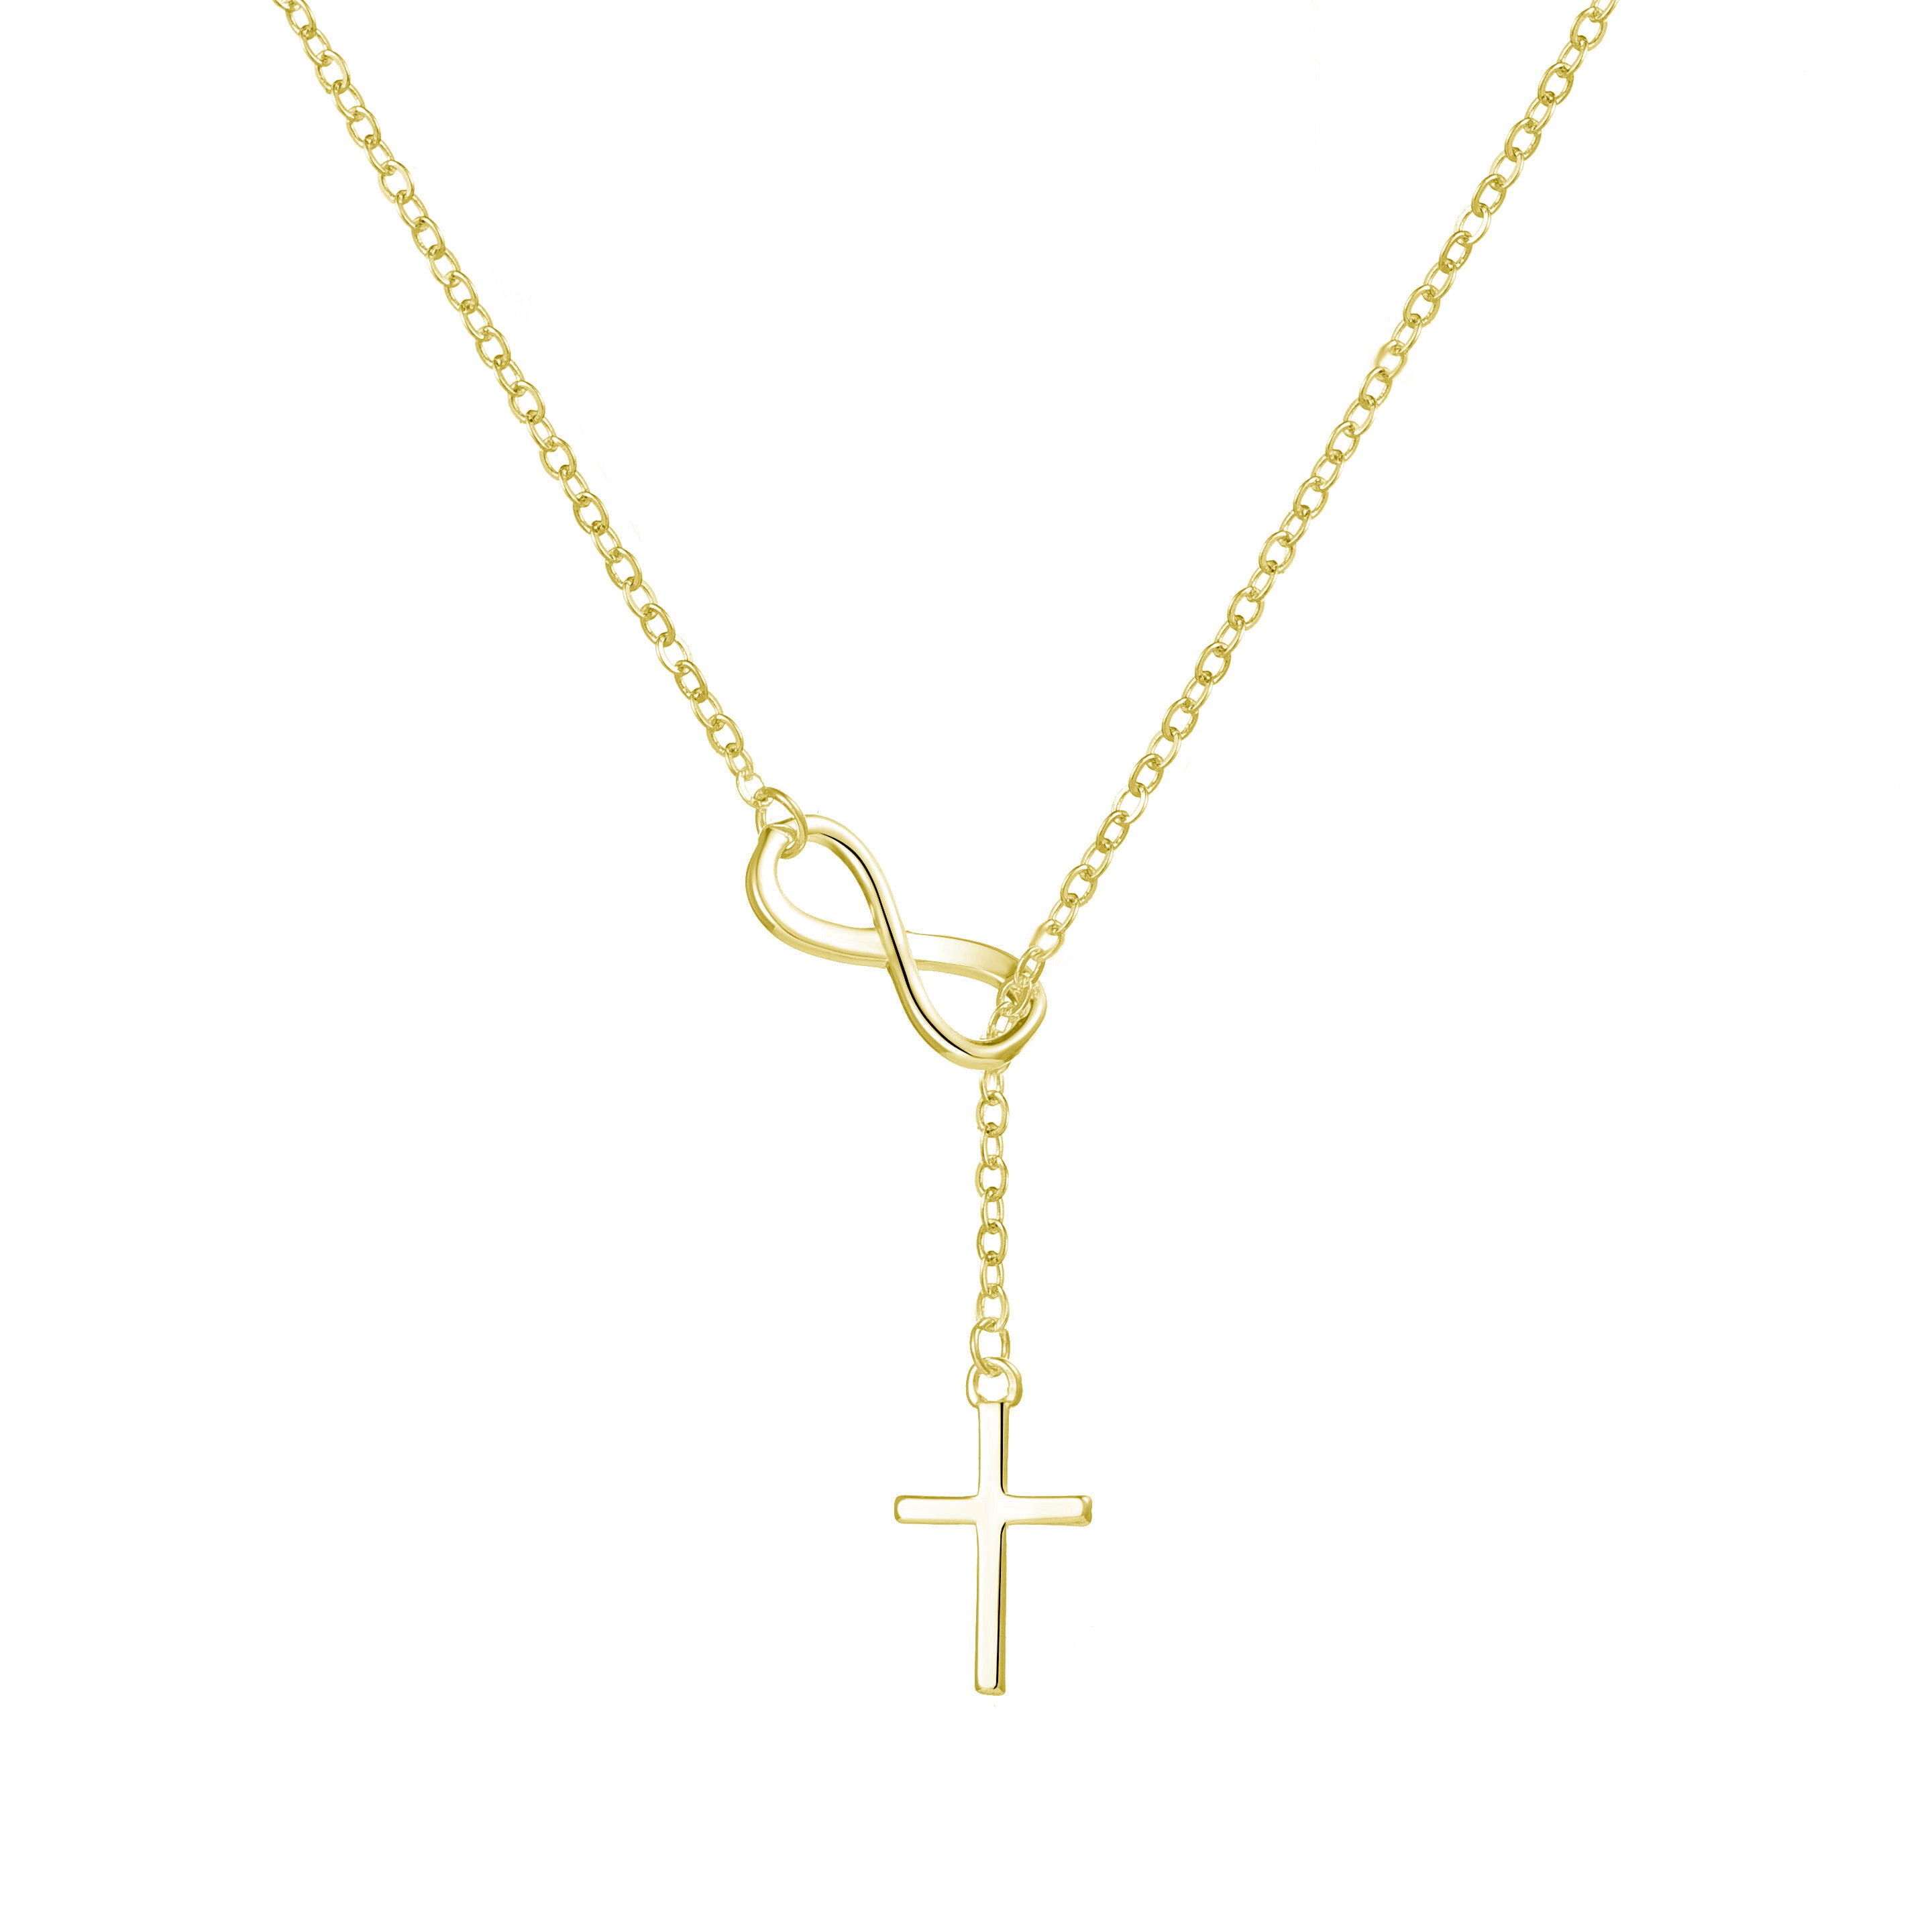 Large Gold Infinity Cross Necklace, 14K Gold Filled, Cubic Zirconium Cross  With Infinity Symbol Necklace, Diamond Style Necklace - Etsy Australia